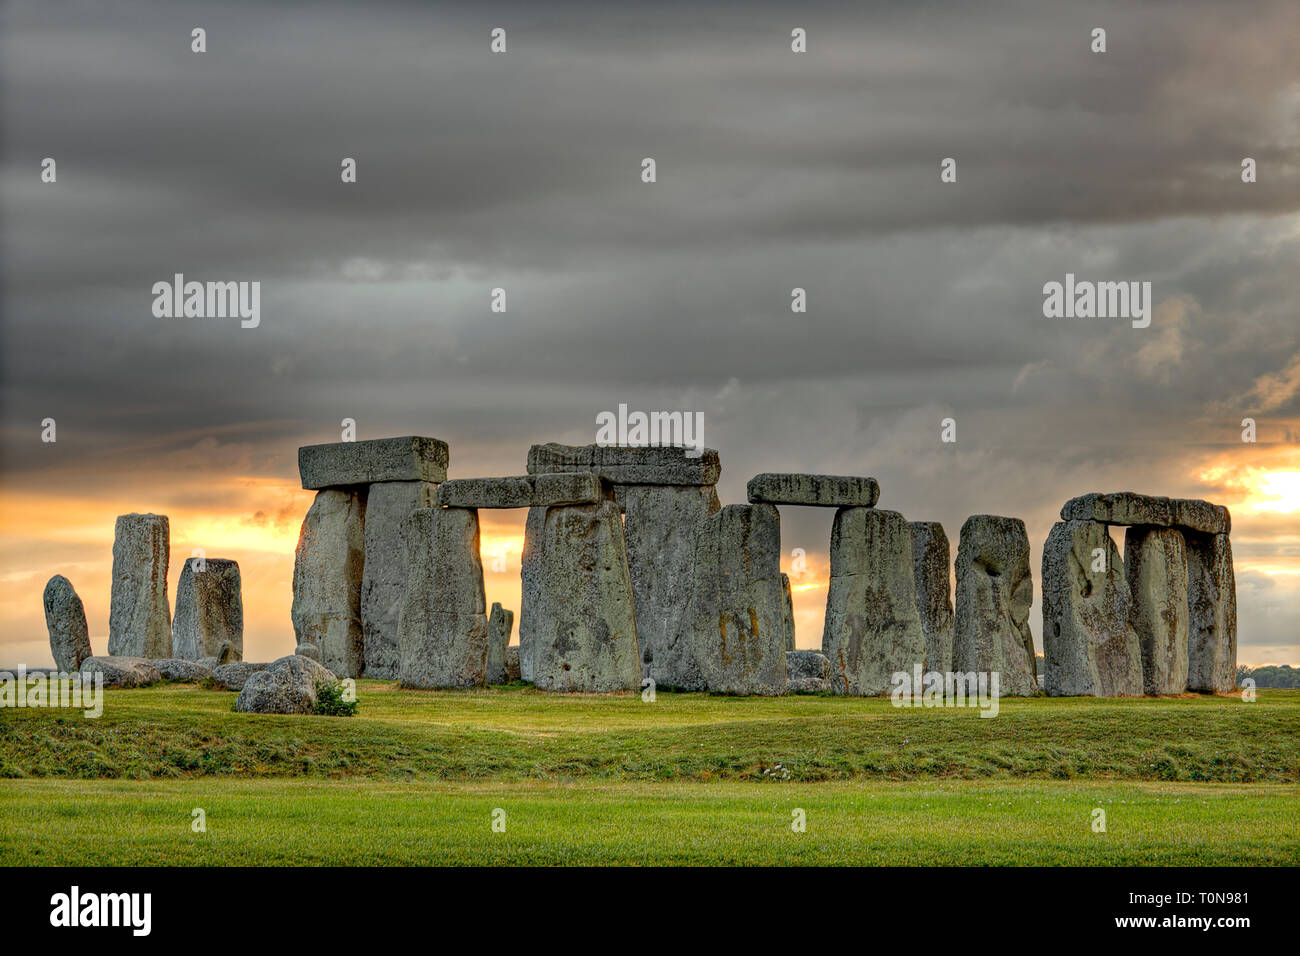 Great Britain, England, Wiltshire. Stonehenge under stormy sky at sunset. Stock Photo